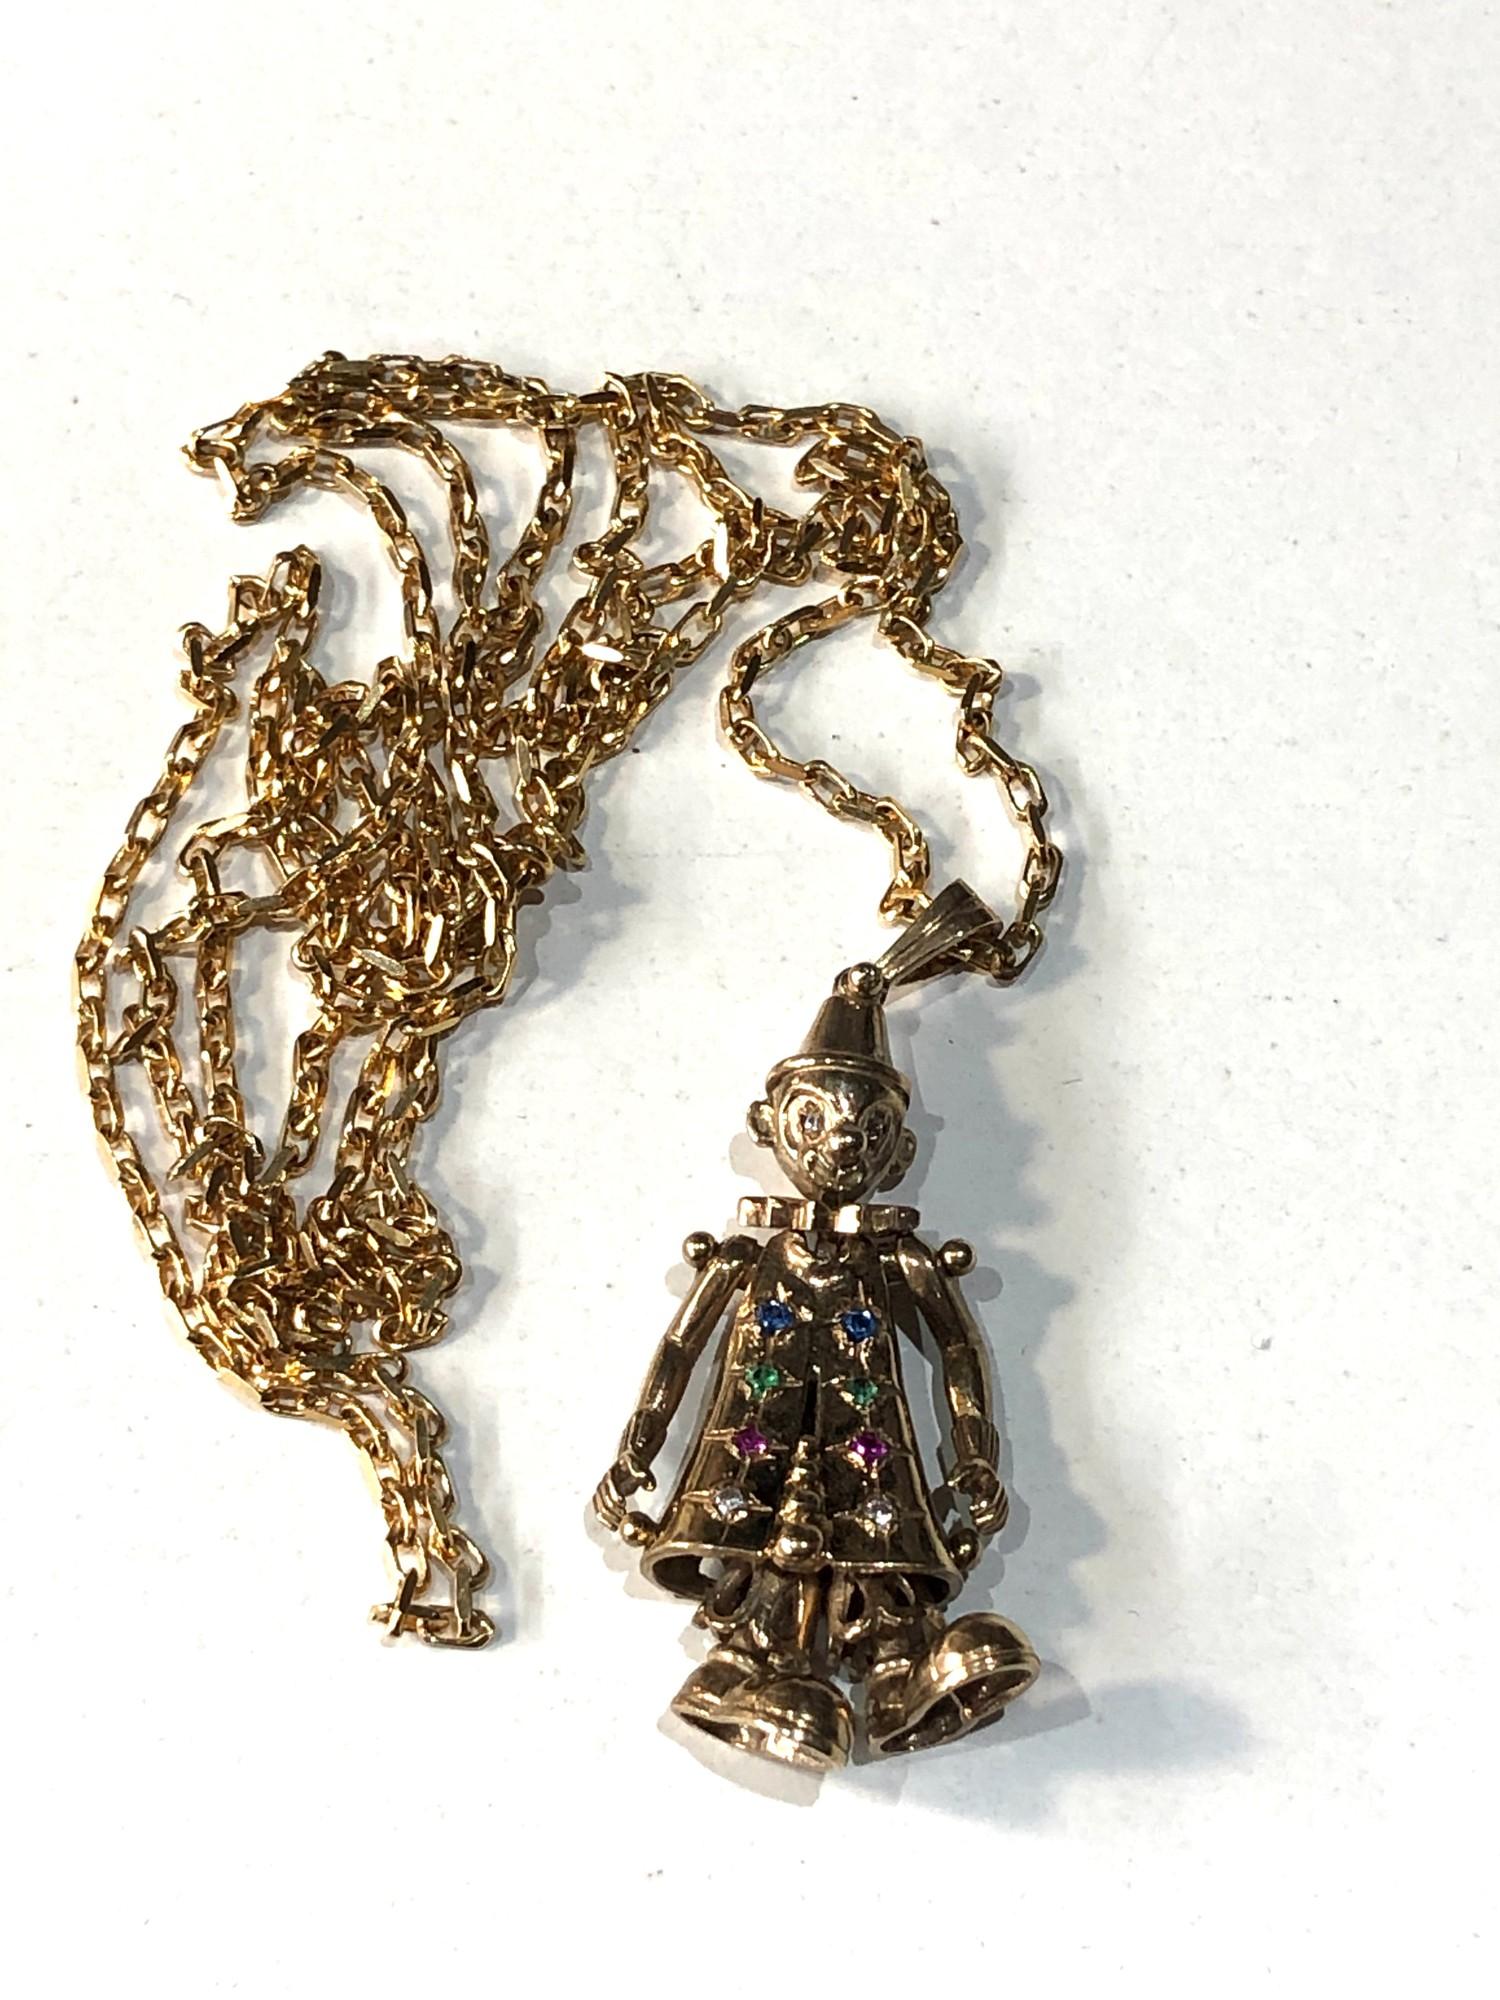 9ct gold articulated clown pendant and chain weight 13.5g